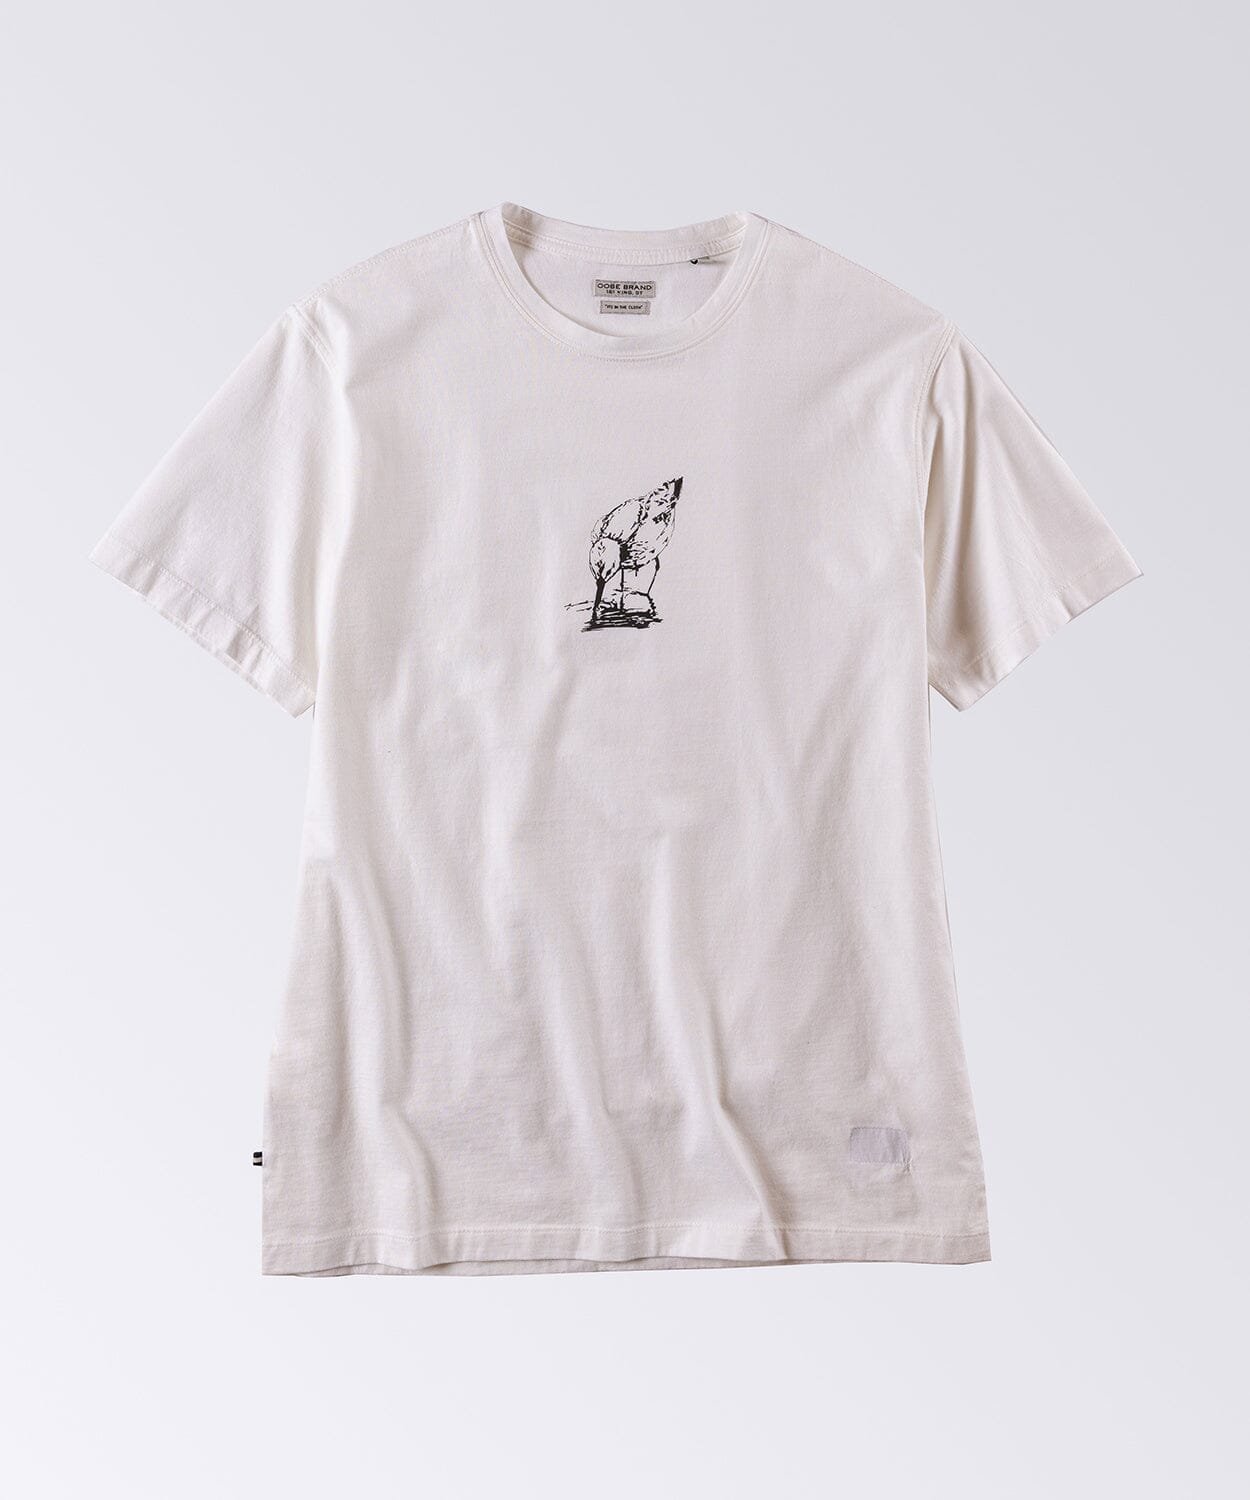 tee with a bird graphic by oobe brand